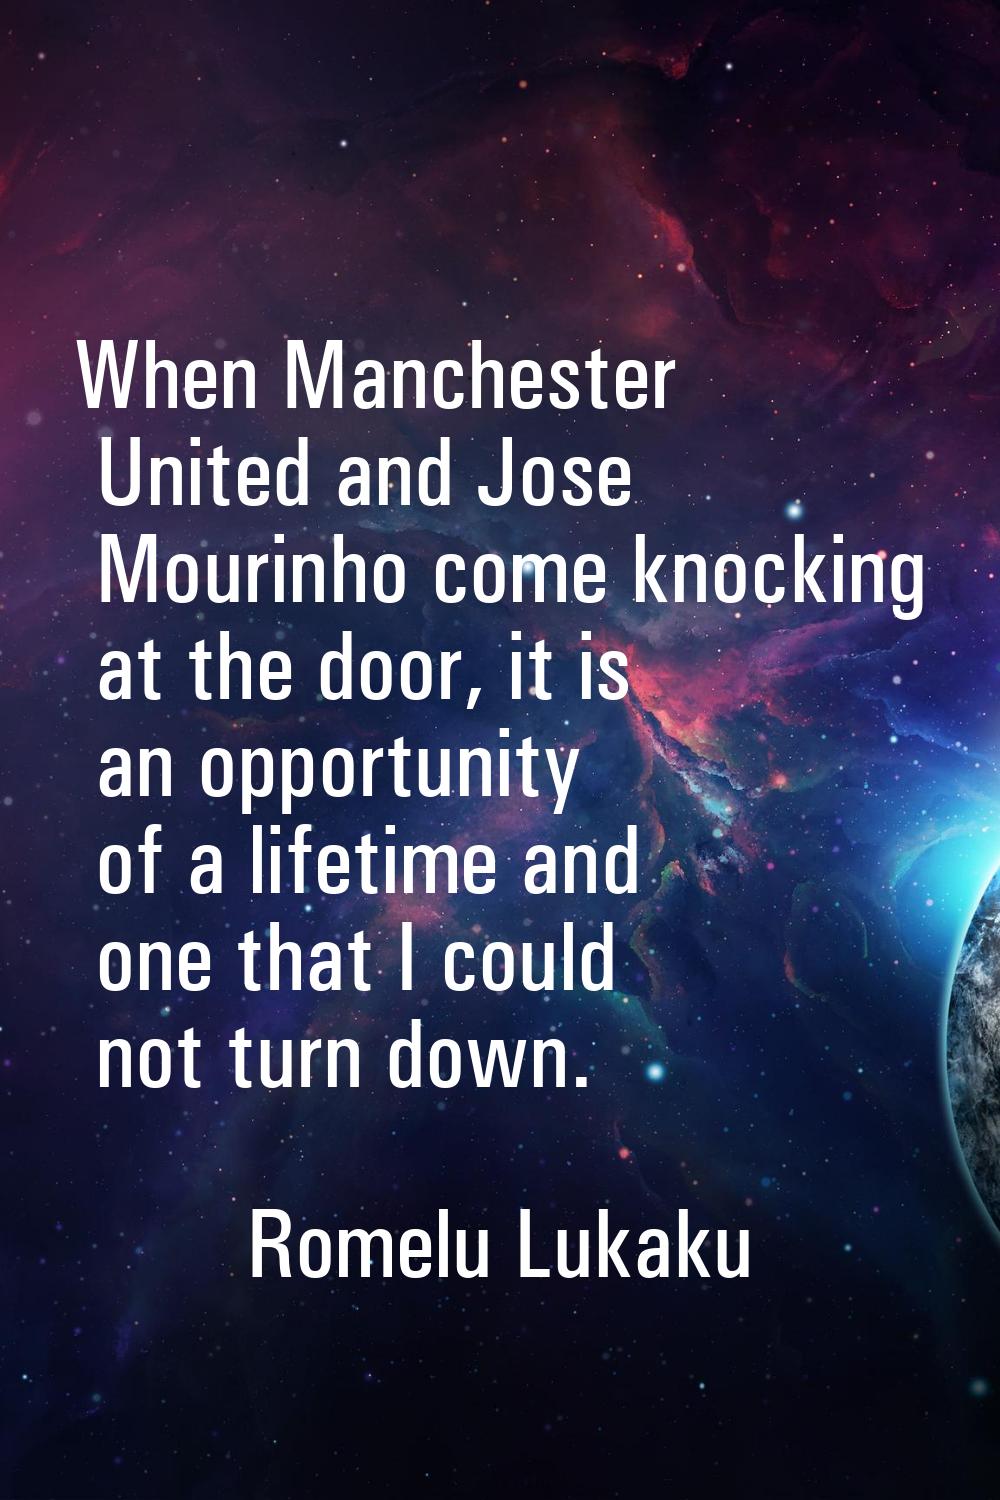 When Manchester United and Jose Mourinho come knocking at the door, it is an opportunity of a lifet